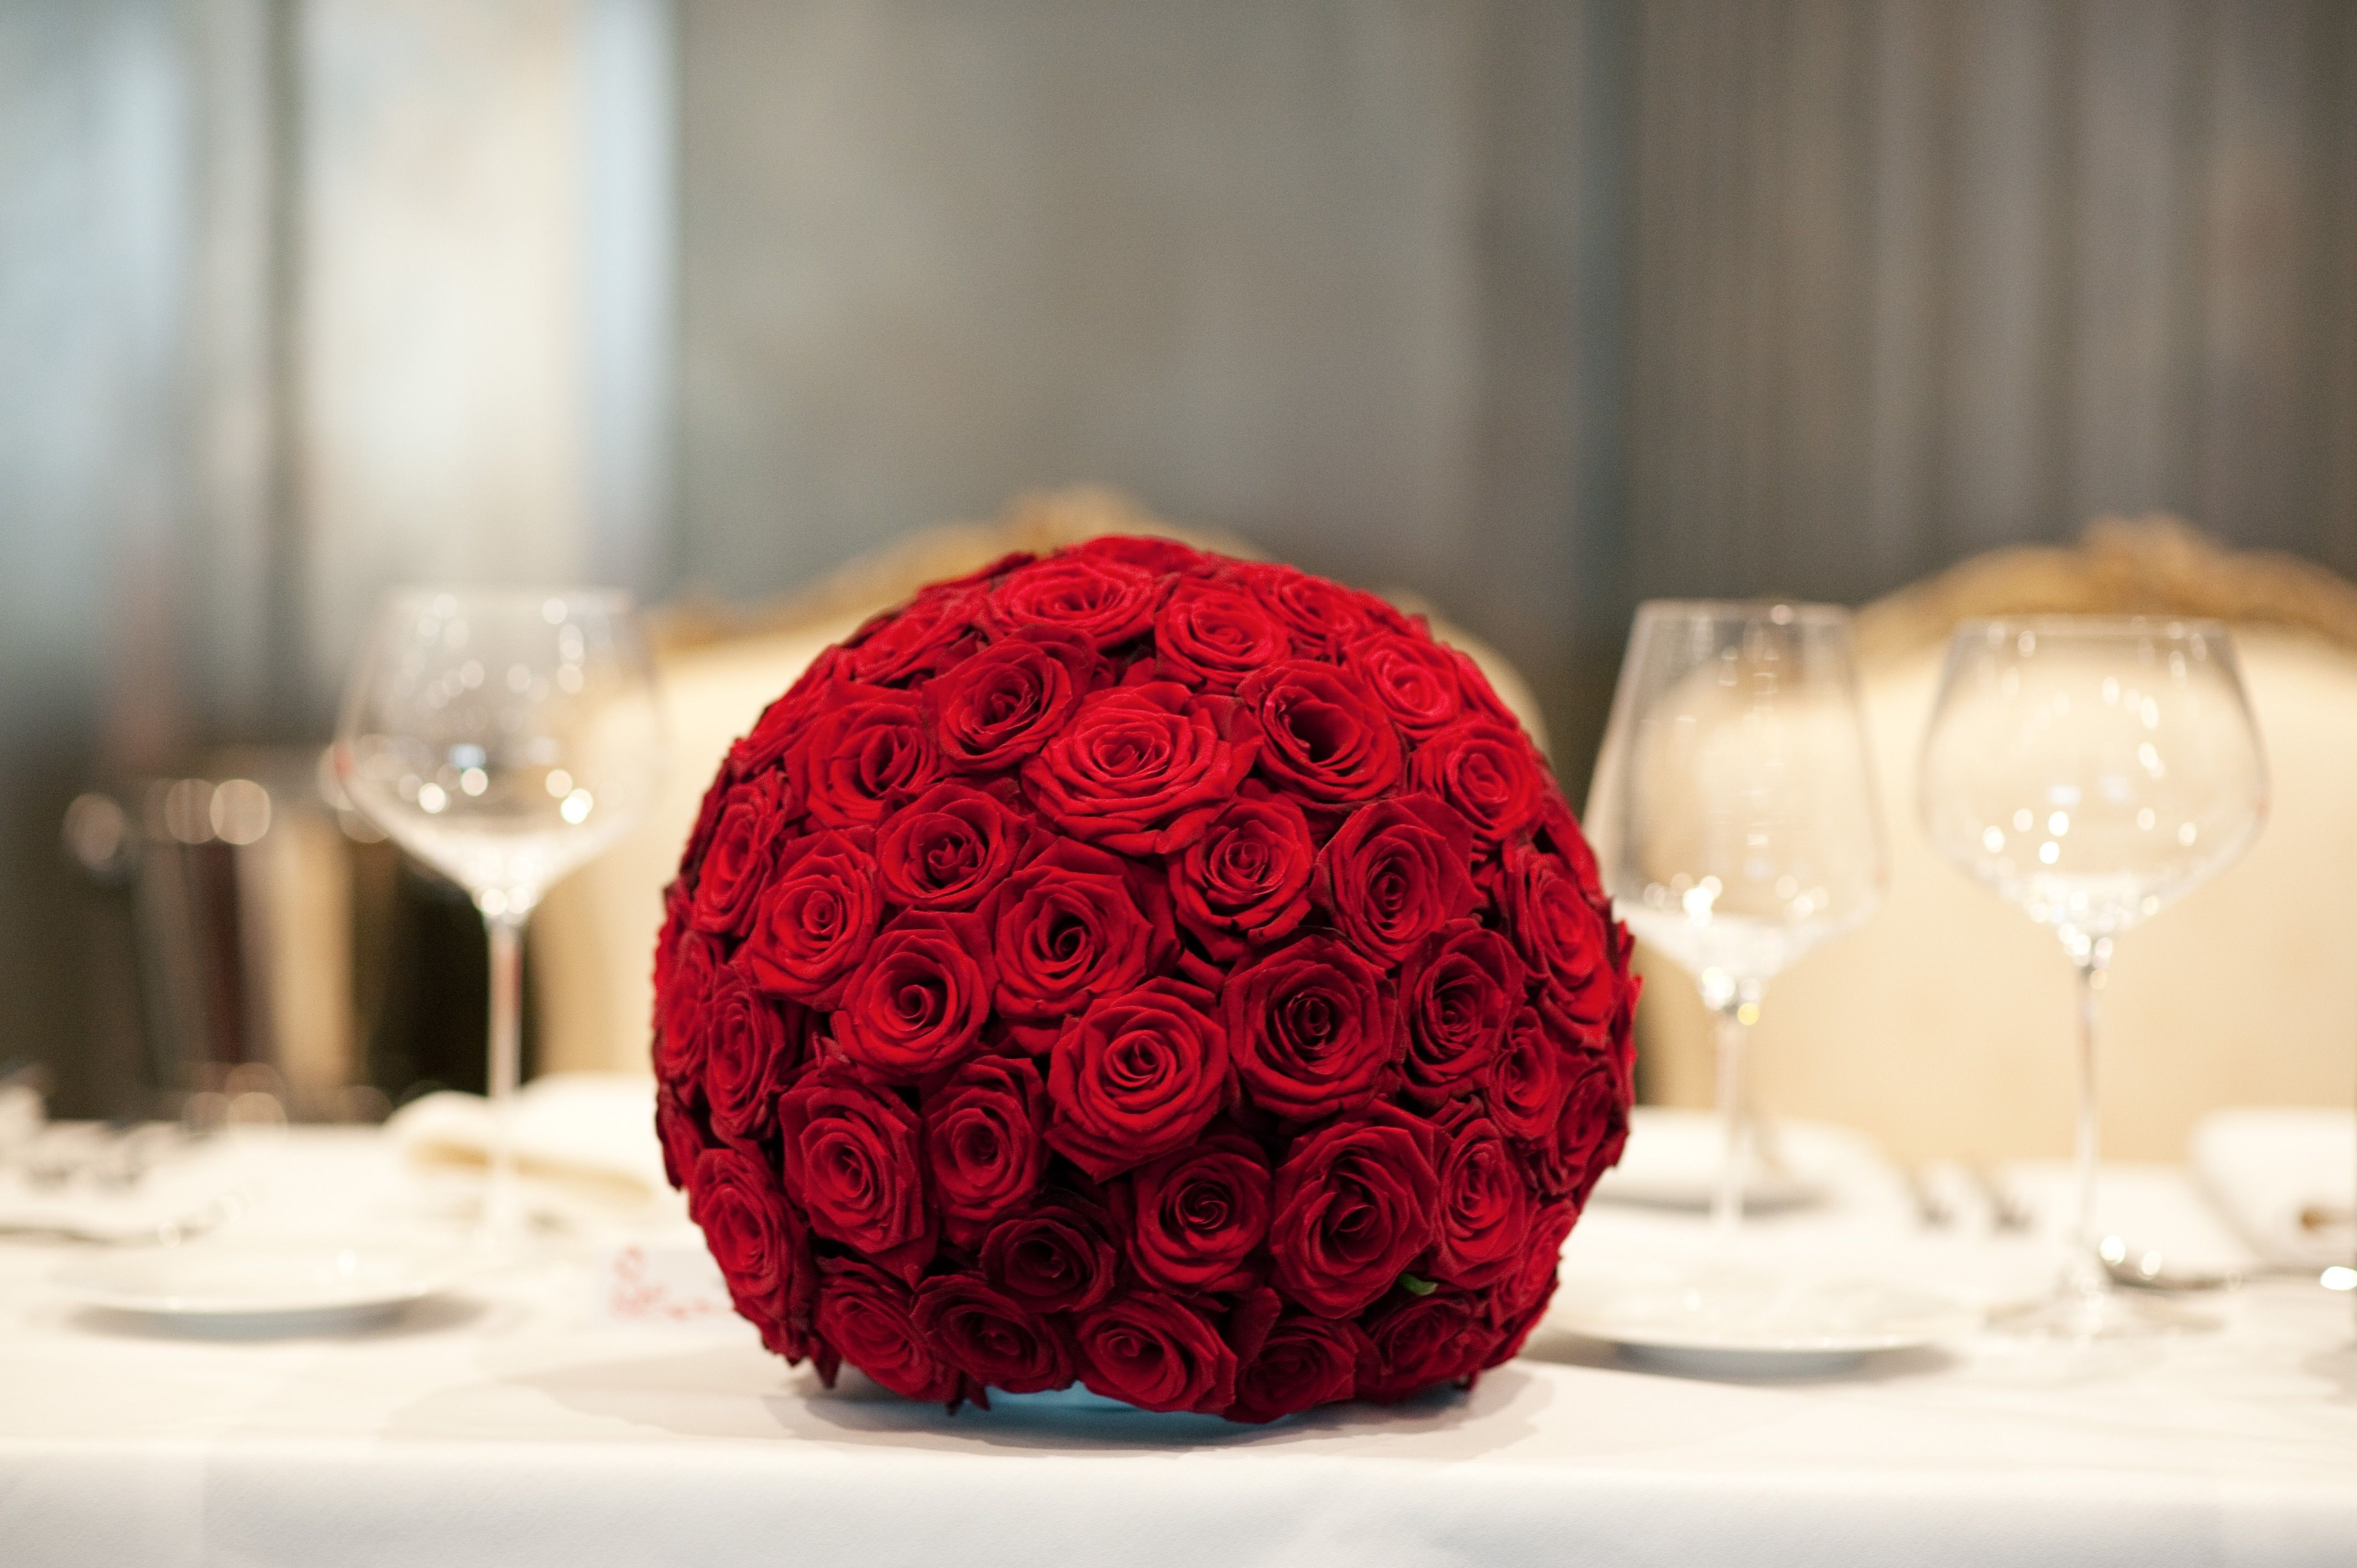 Romantic Red Rose Centerpieces For Wedding Table (View 1 of 15)